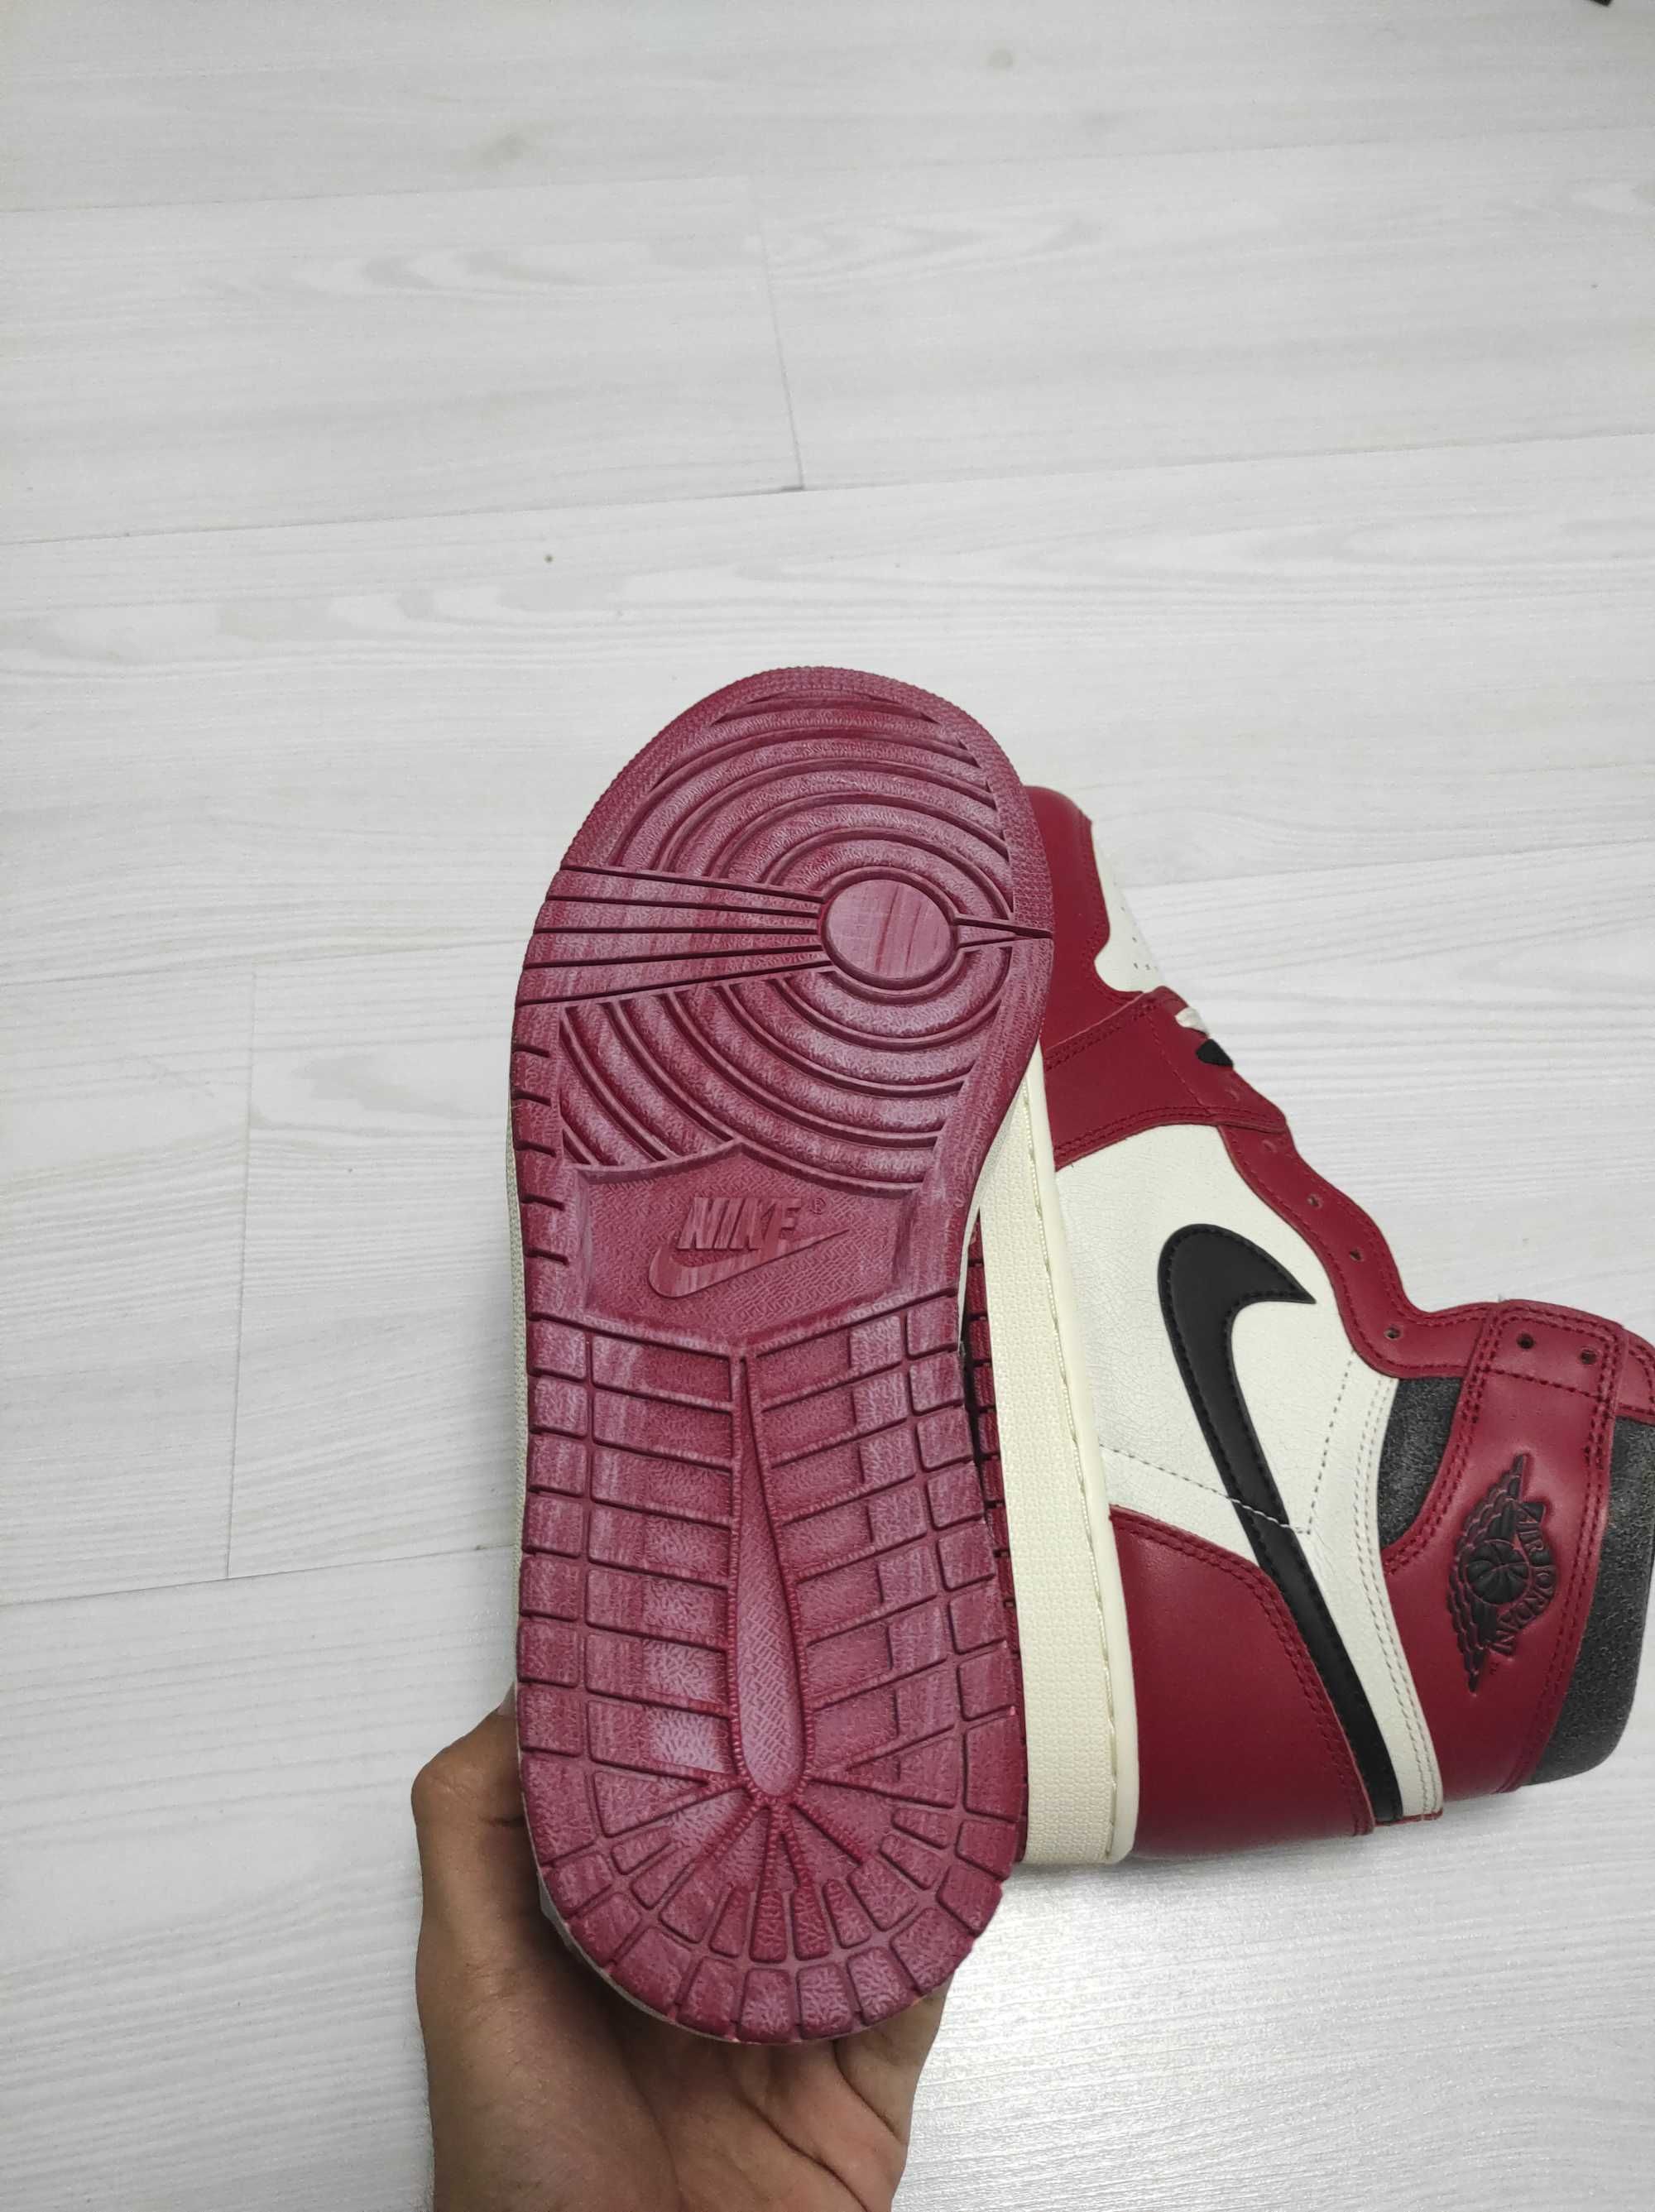 Nike Jordan 1 High Chicago Lost and found